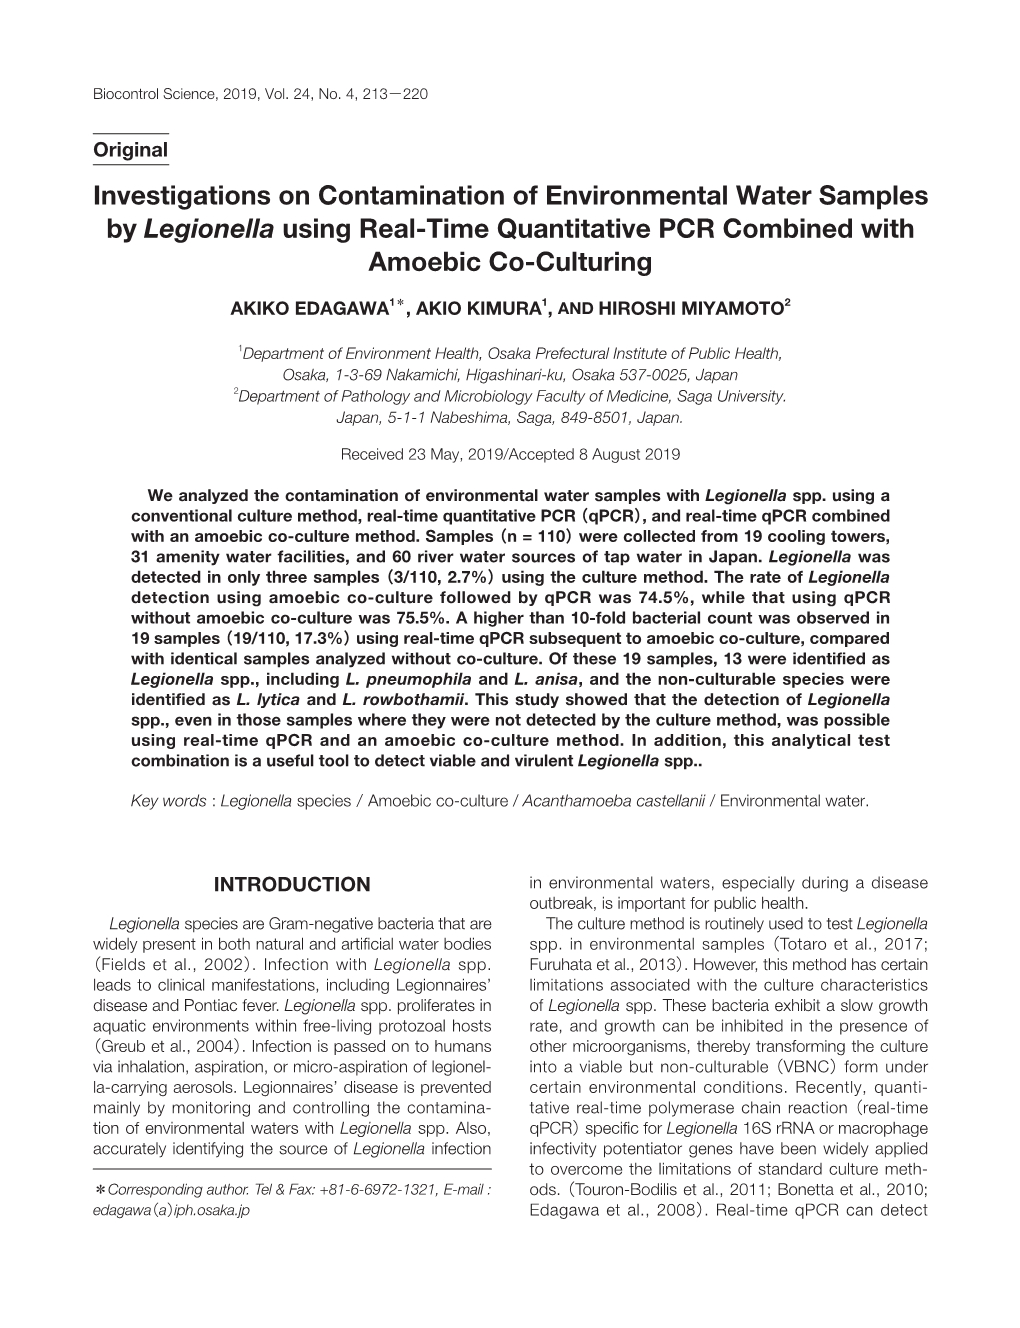 Investigations on Contamination of Environmental Water Samples by Legionella Using Real-Time Quantitative PCR Combined with Amoebic Co-Culturing